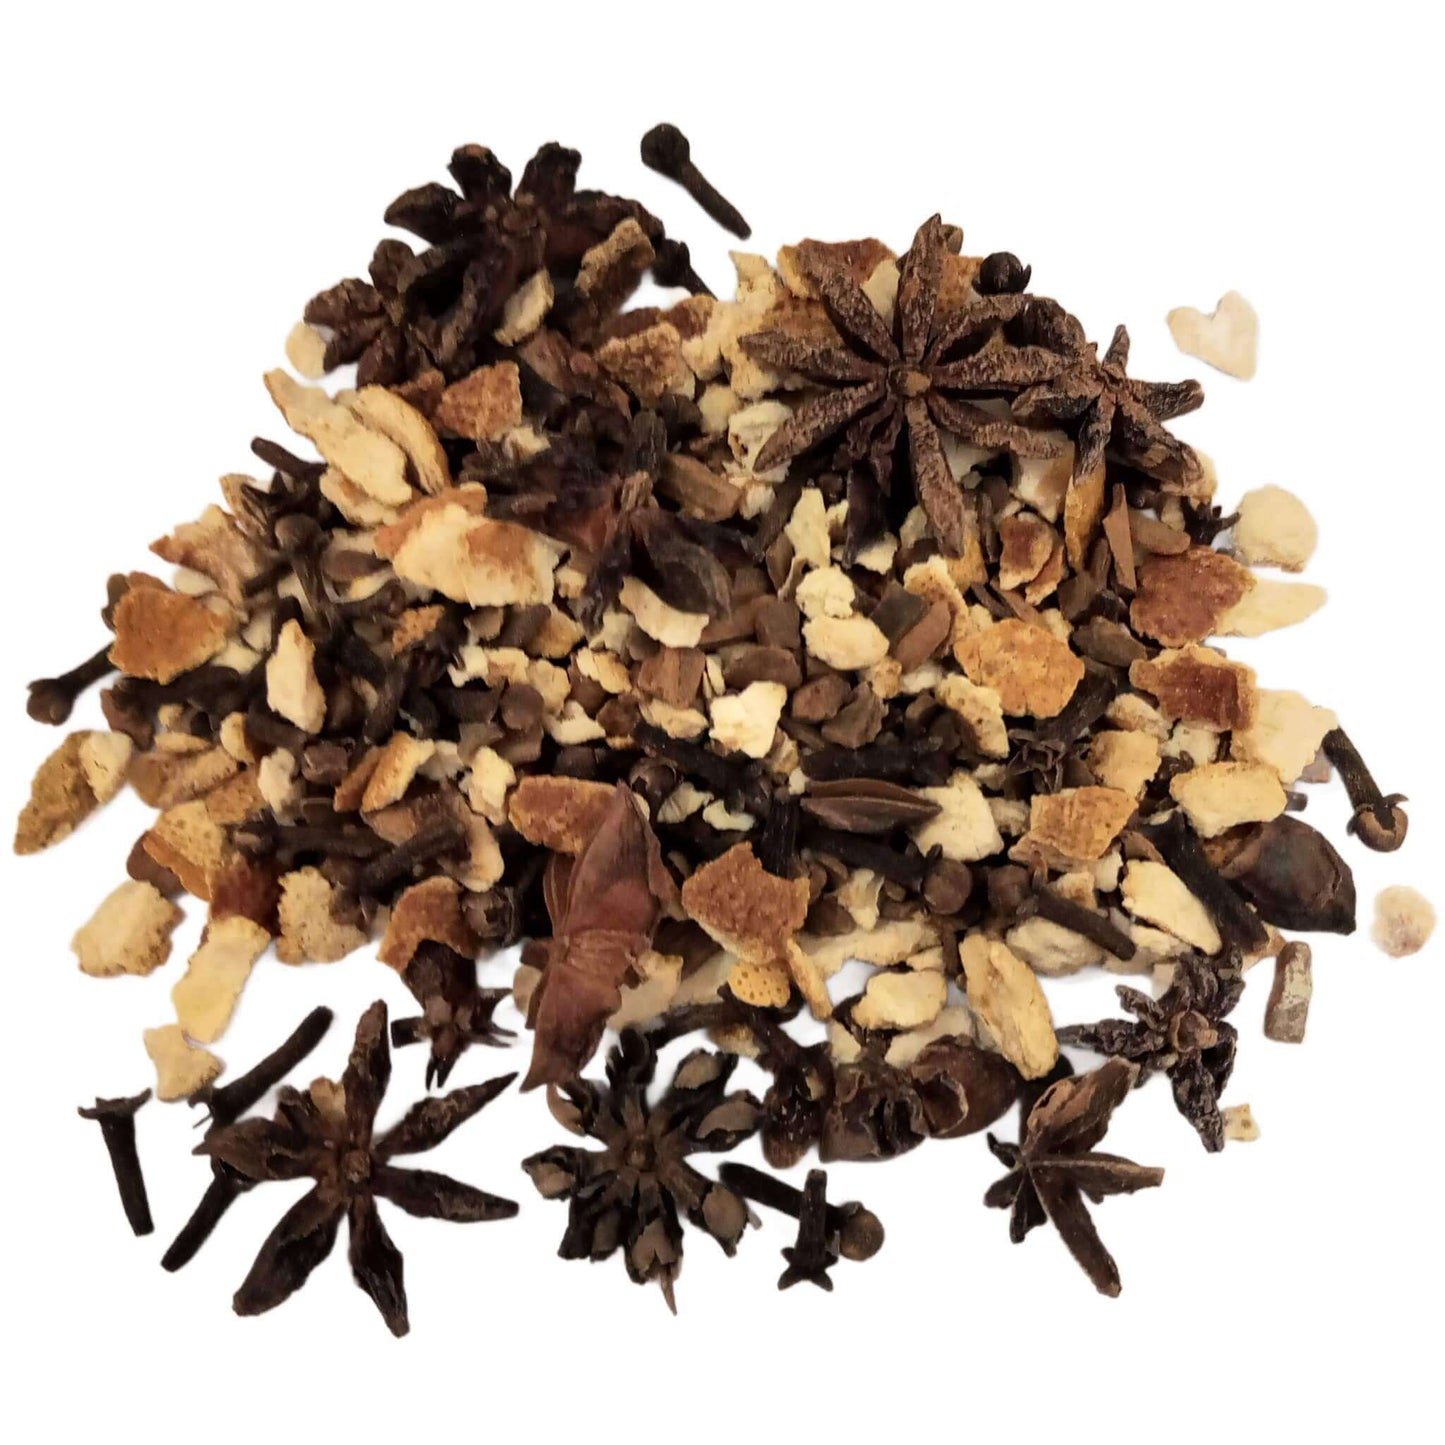 Experience the vintage scent of our Victorian Kitchen Wildcraft Rustic Simmer Potpourri. Bring history to life!